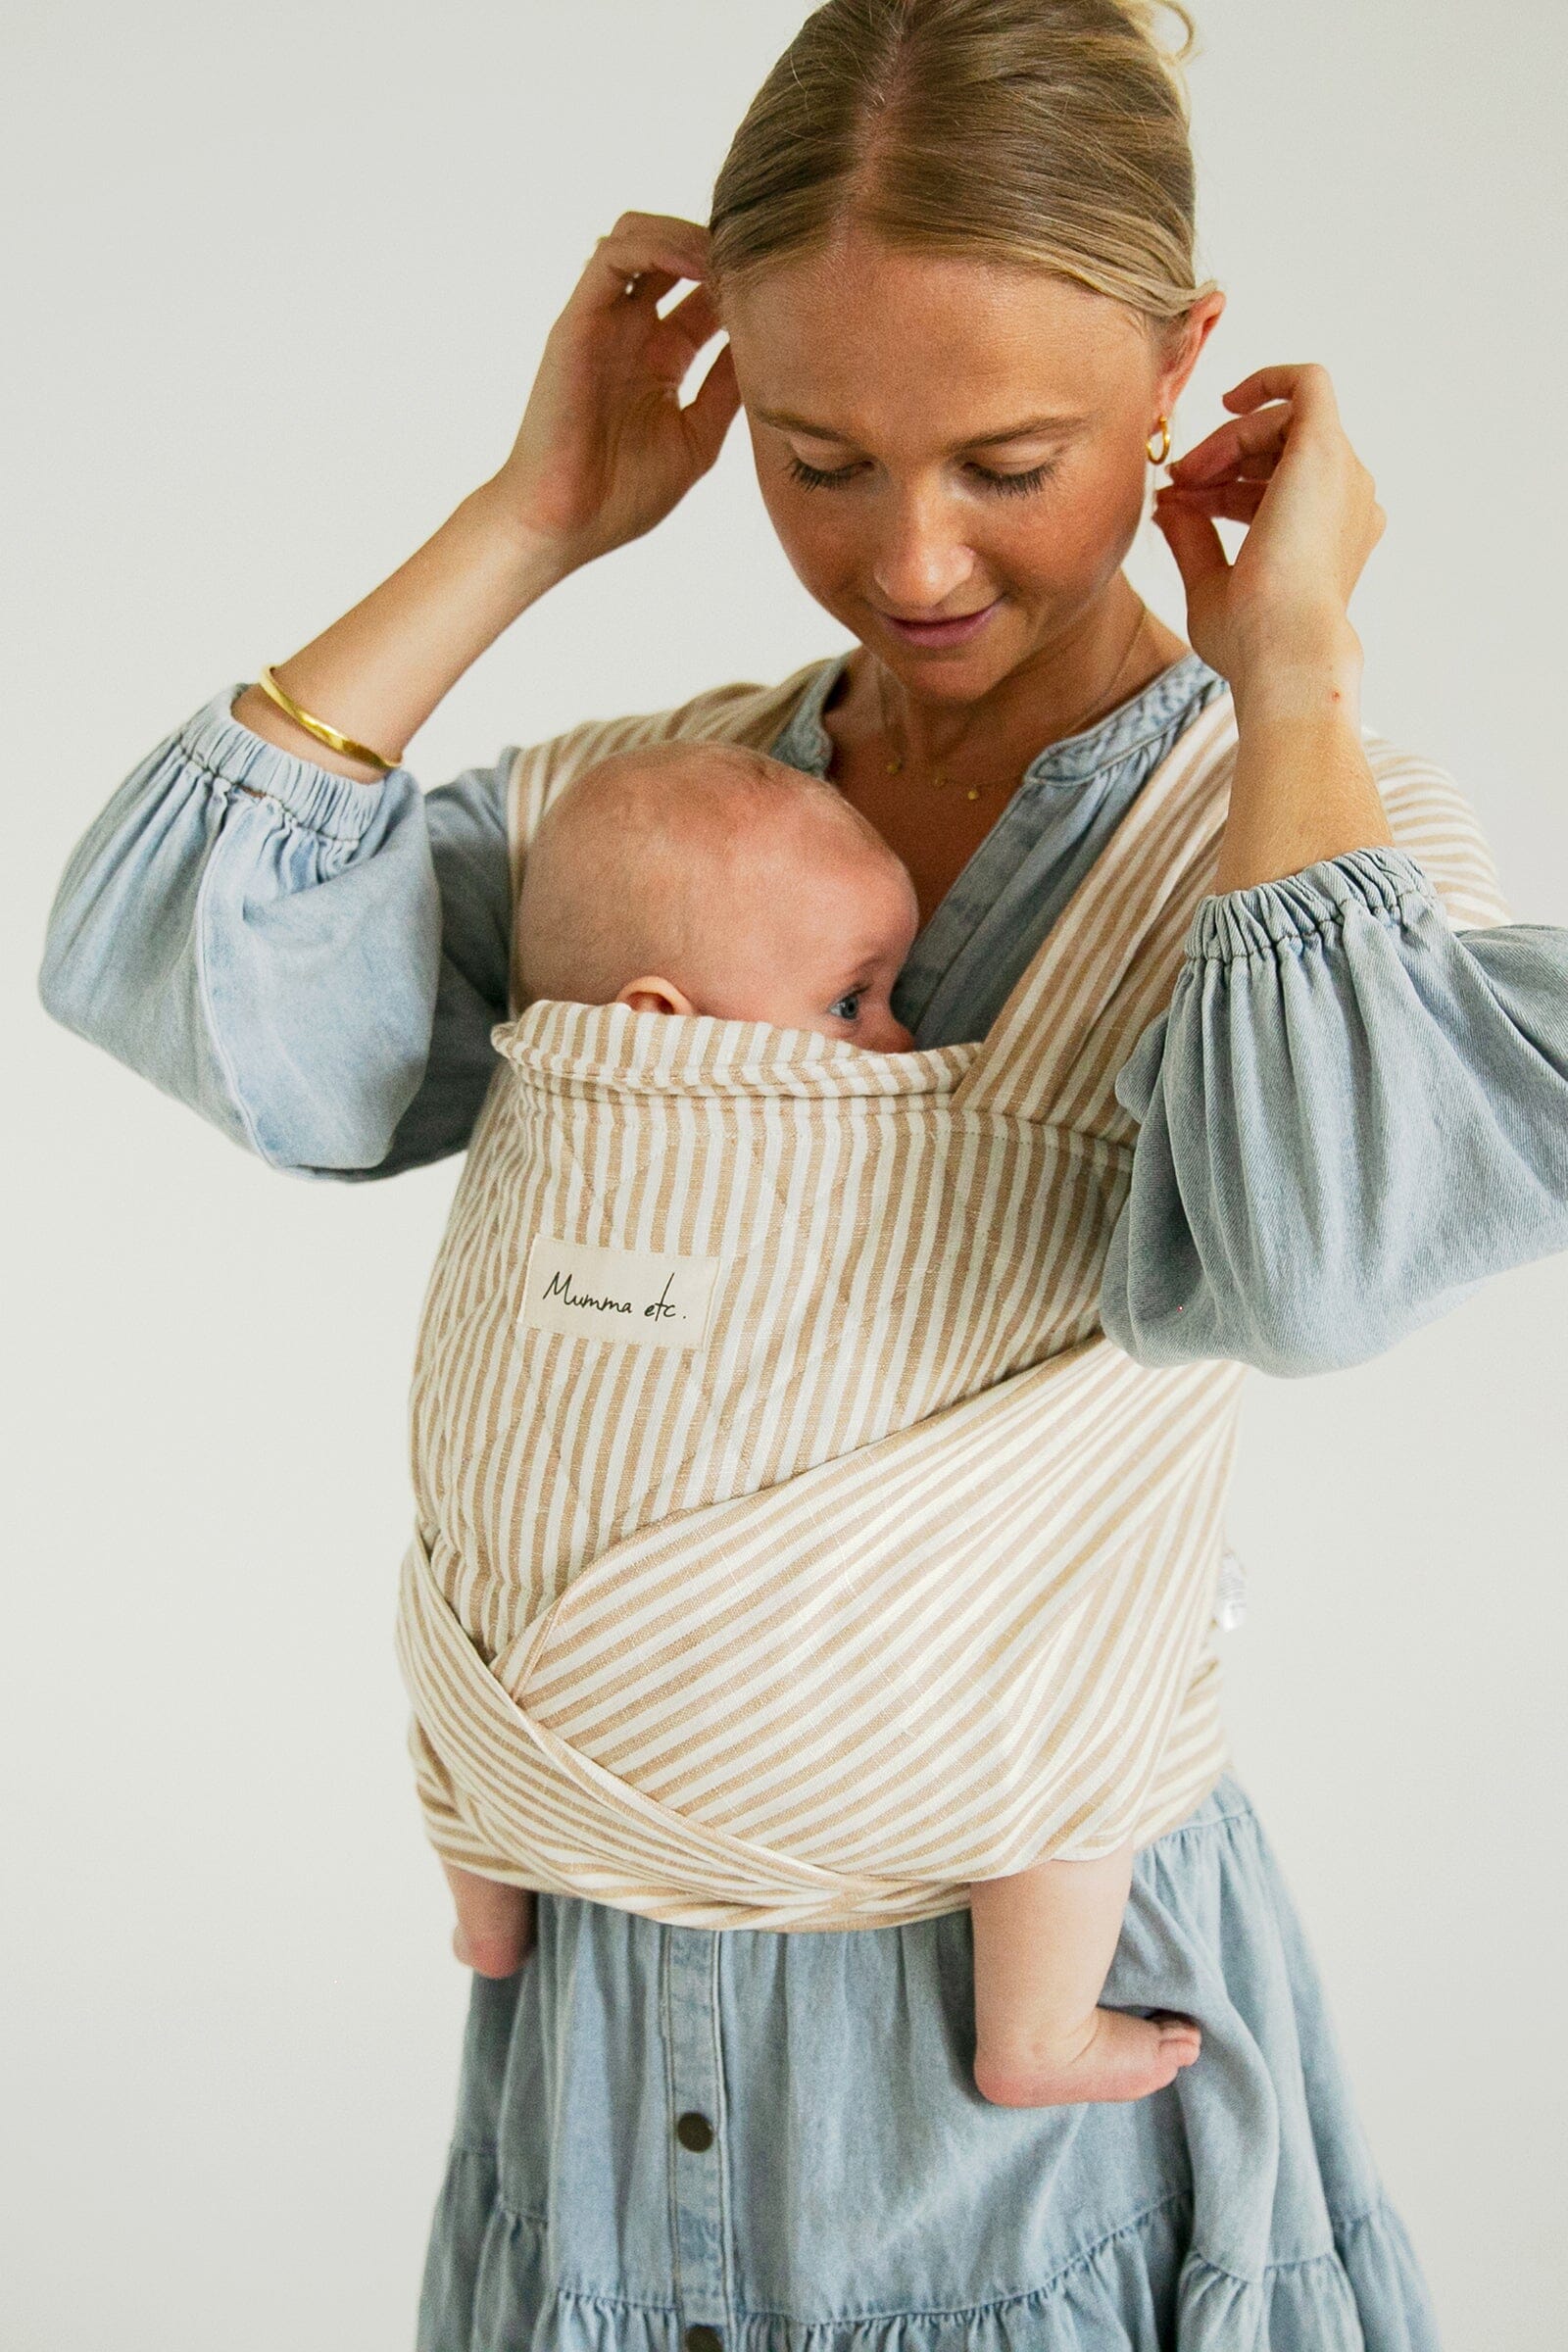 Baby Wrap Carrier Baby carriers Mumma Etc Regular (suitable for up to dress size 14) Burleigh 